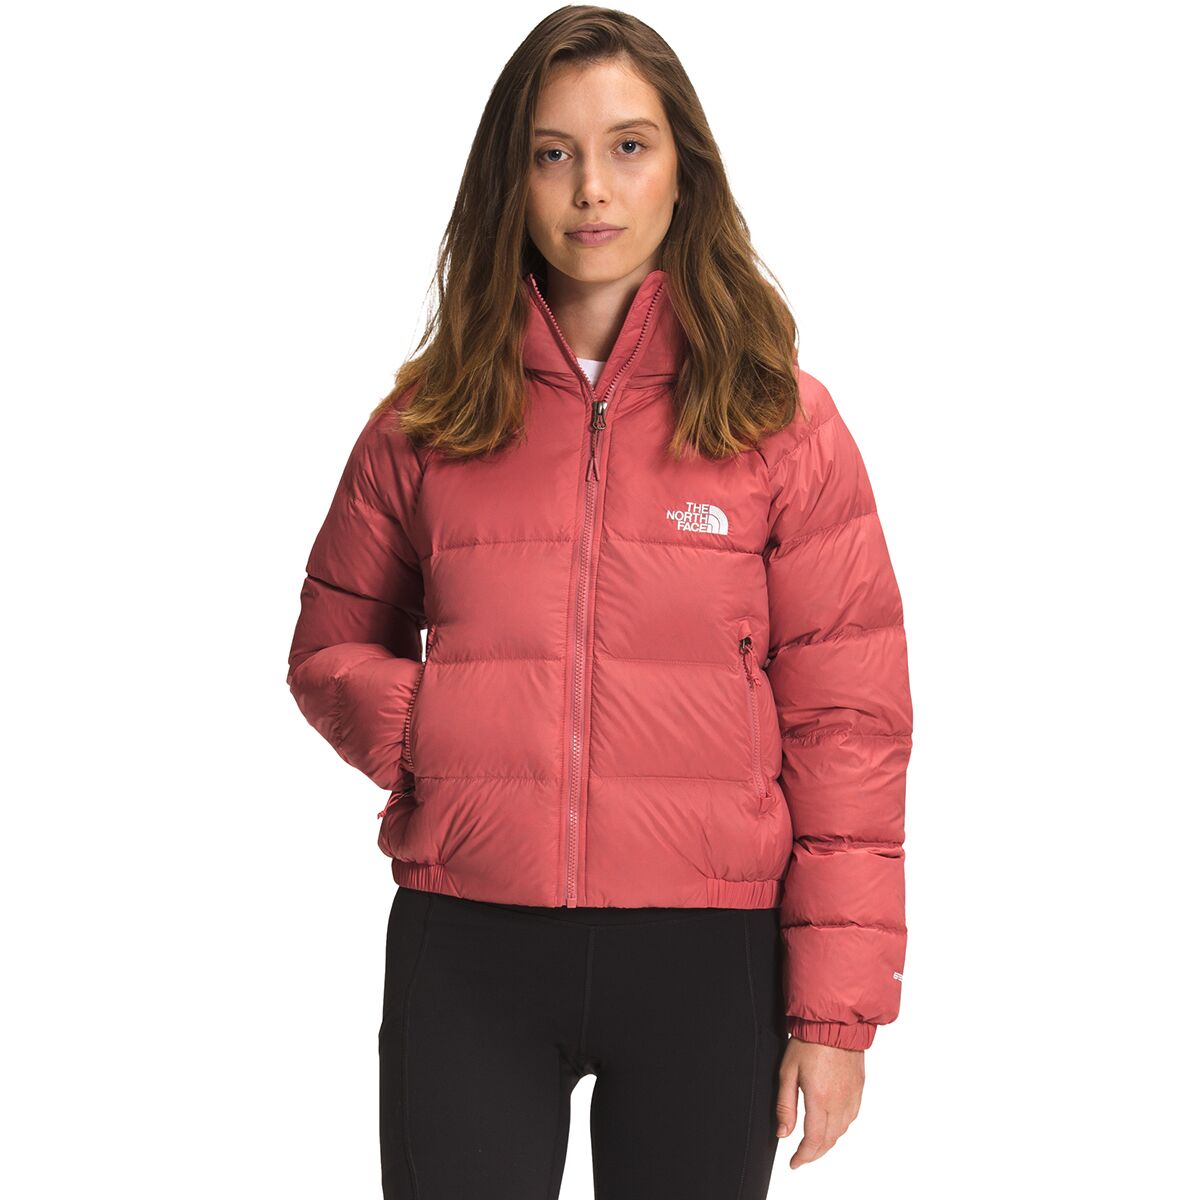 The North Face Hydrenalite Down Hooded Jacket - Women's